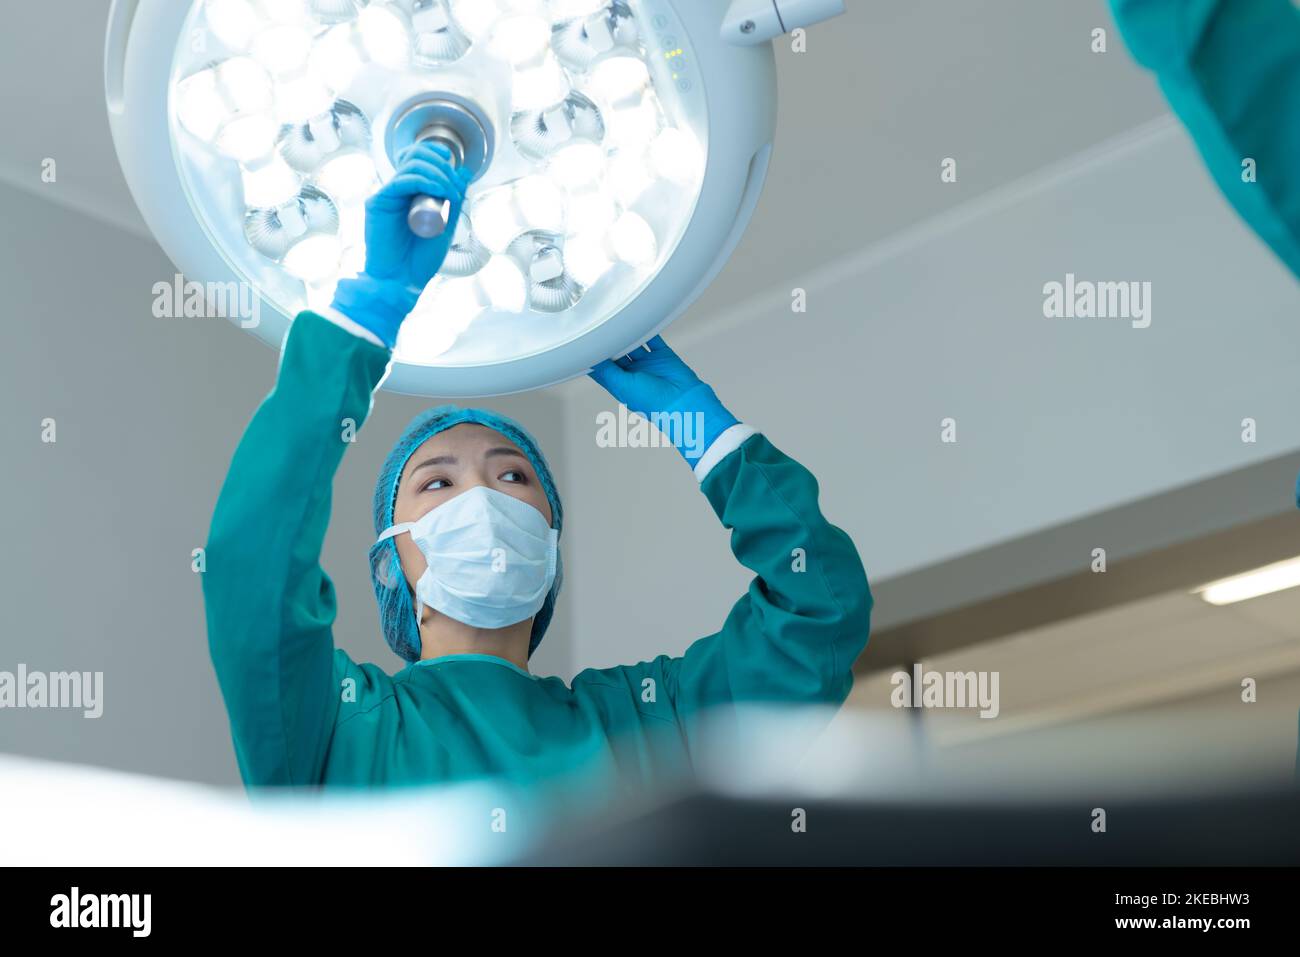 Asian female surgeon adjusting lights in operating theatre for operation, with copy space. Hospital, medical and healthcare services. Stock Photo